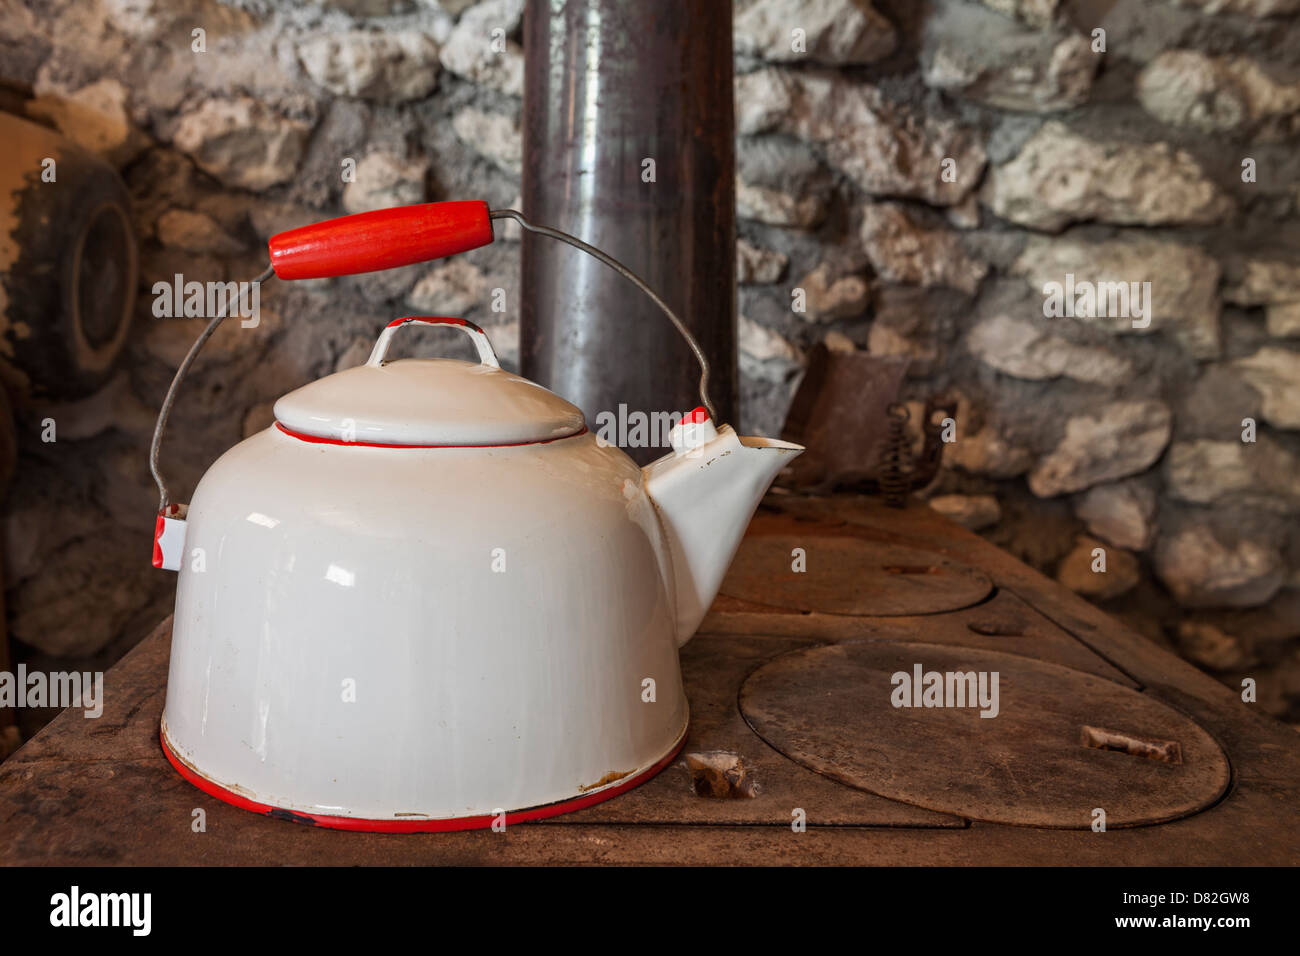 Antique metal tea kettle on top of wood burning stove Stock Photo